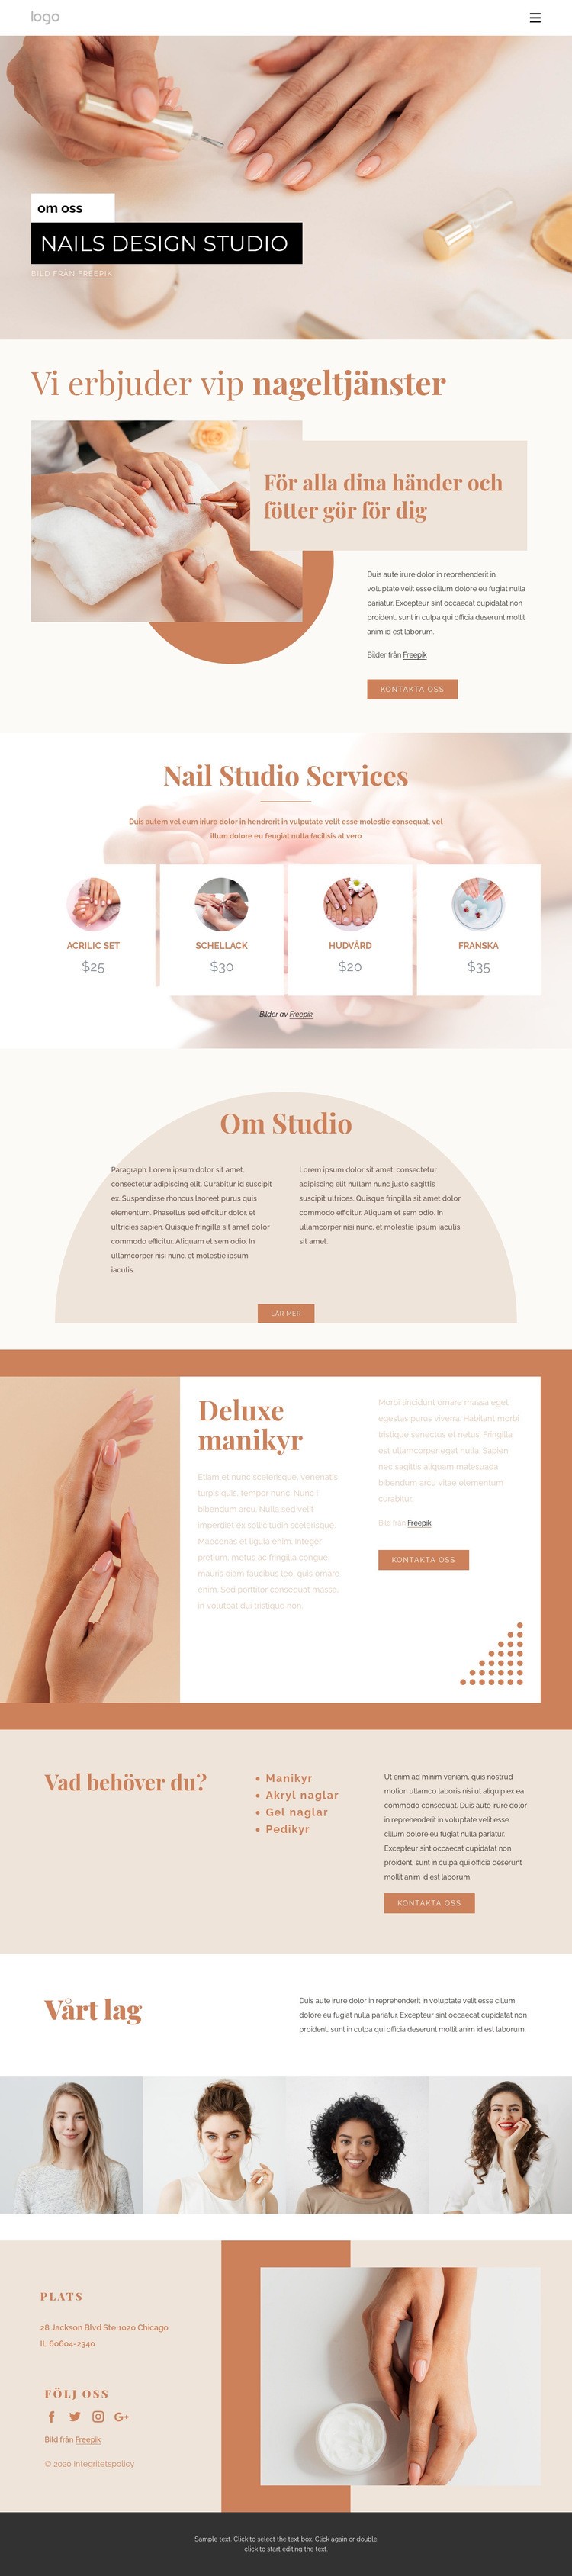 Professionell nagelkonst HTML-mall